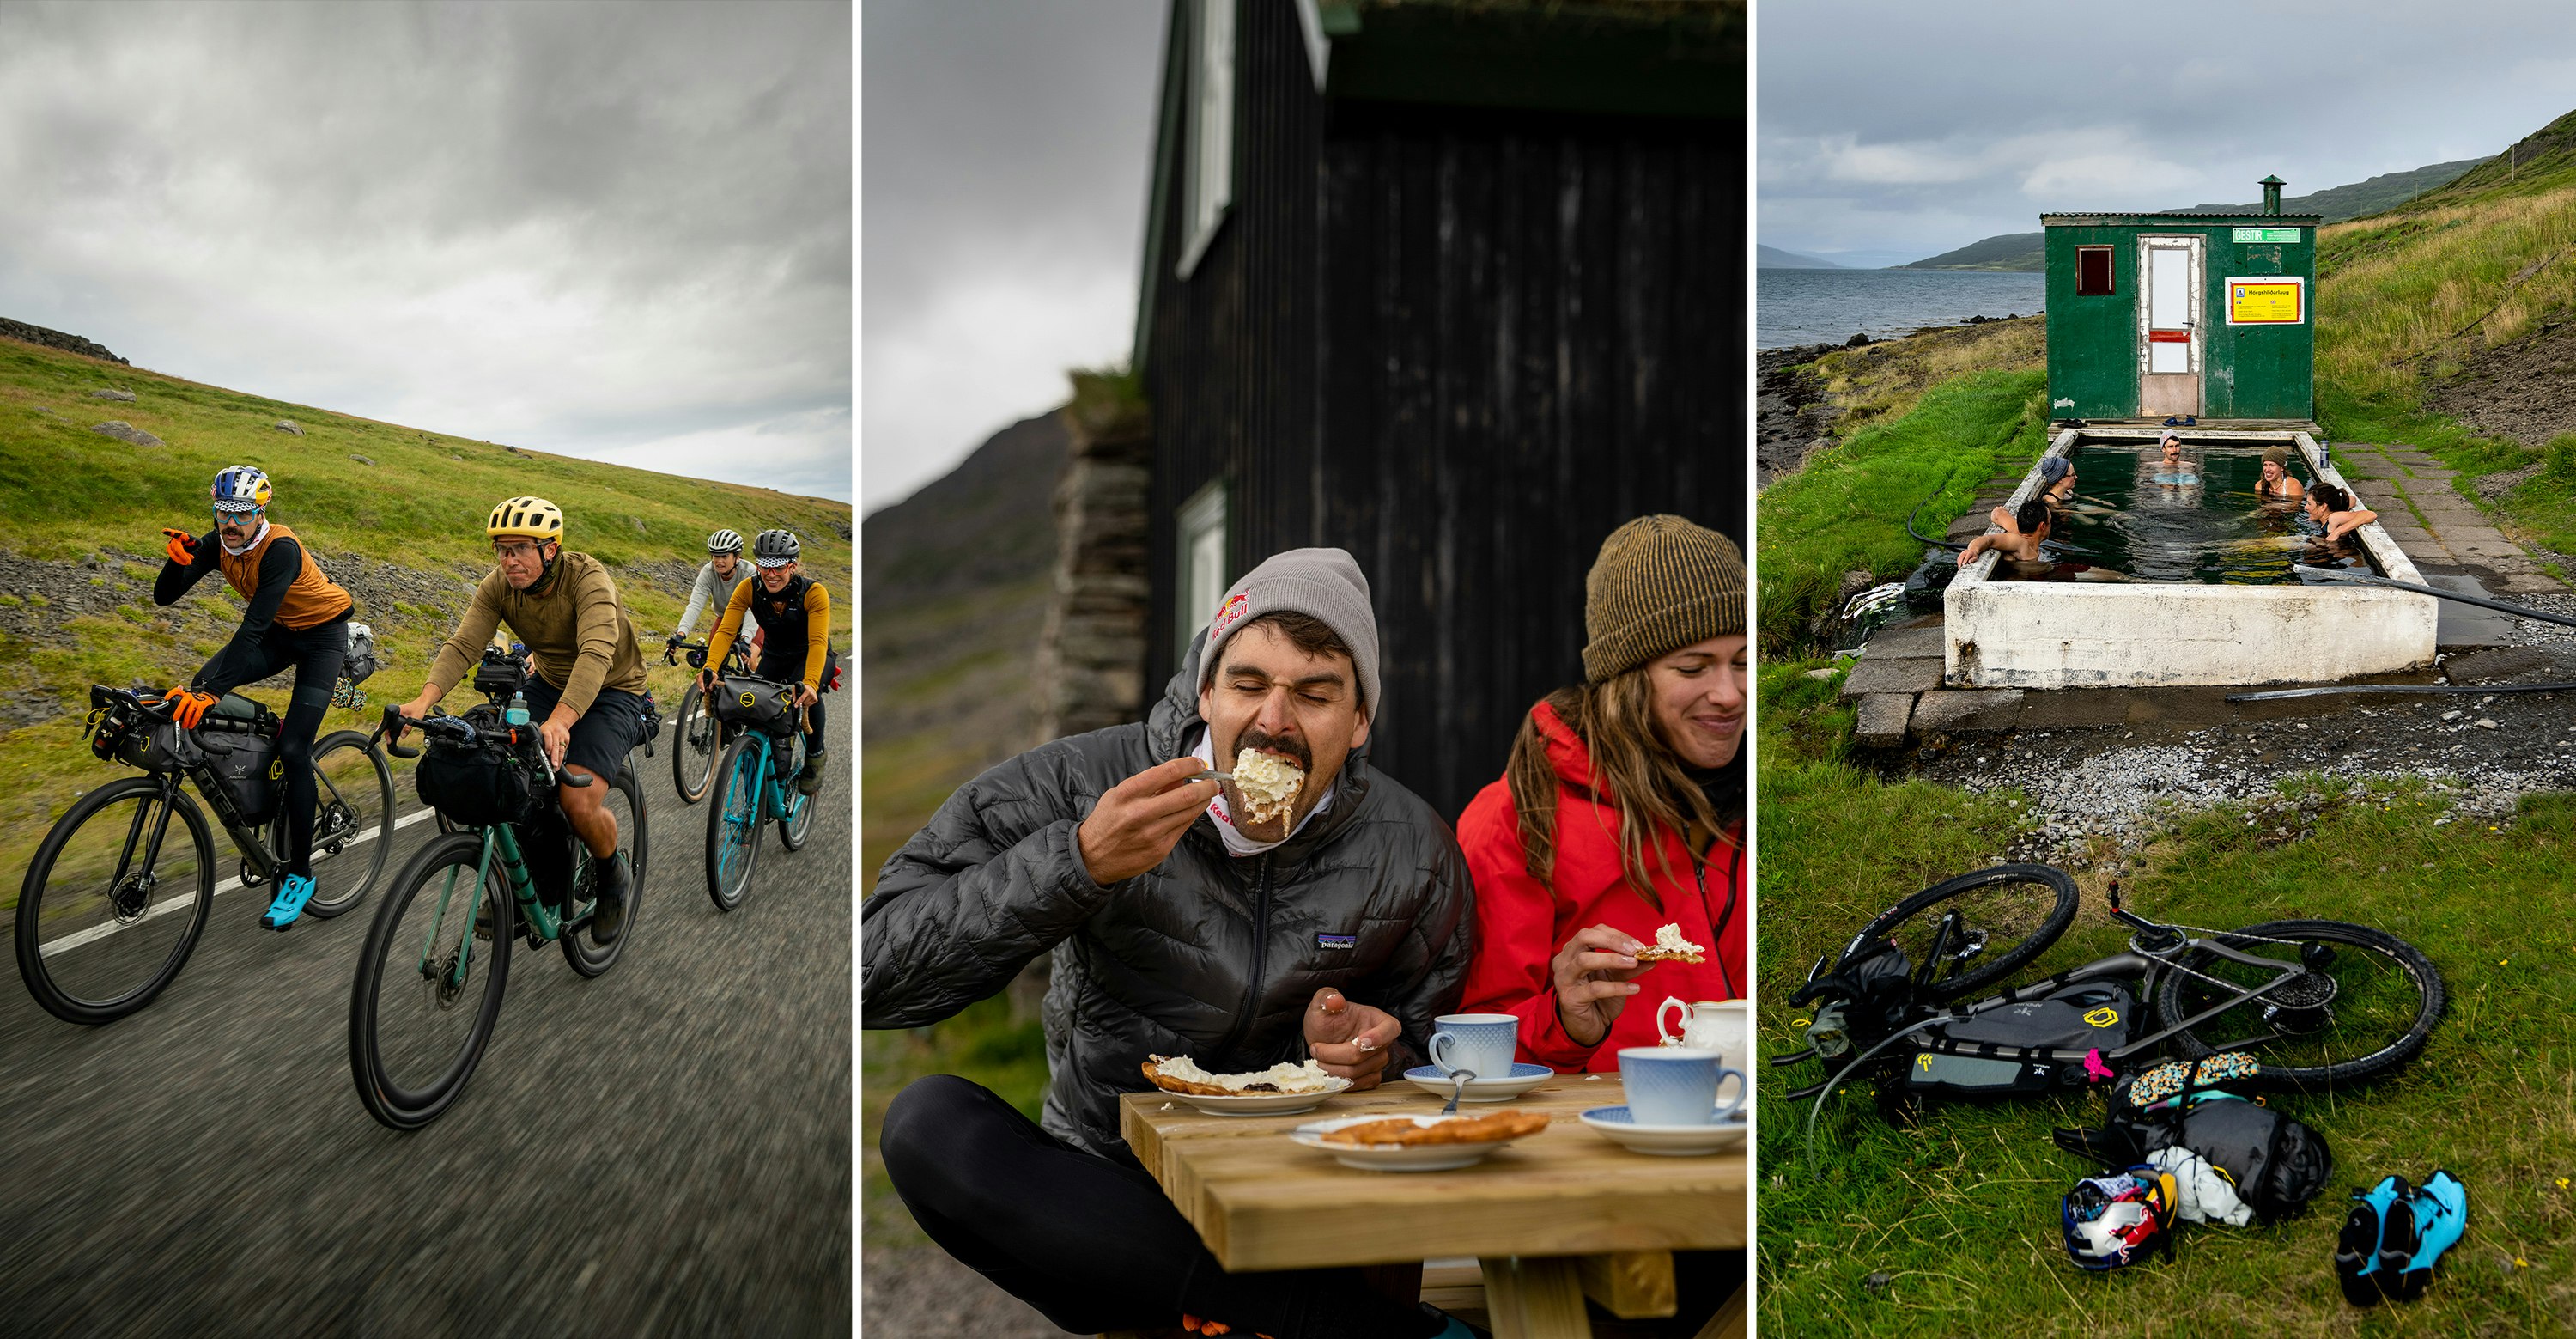 Three photos: one of a group of cyclists rolling down a gravel path, one of a man eating waffles, and the group soaking in a hot spring.